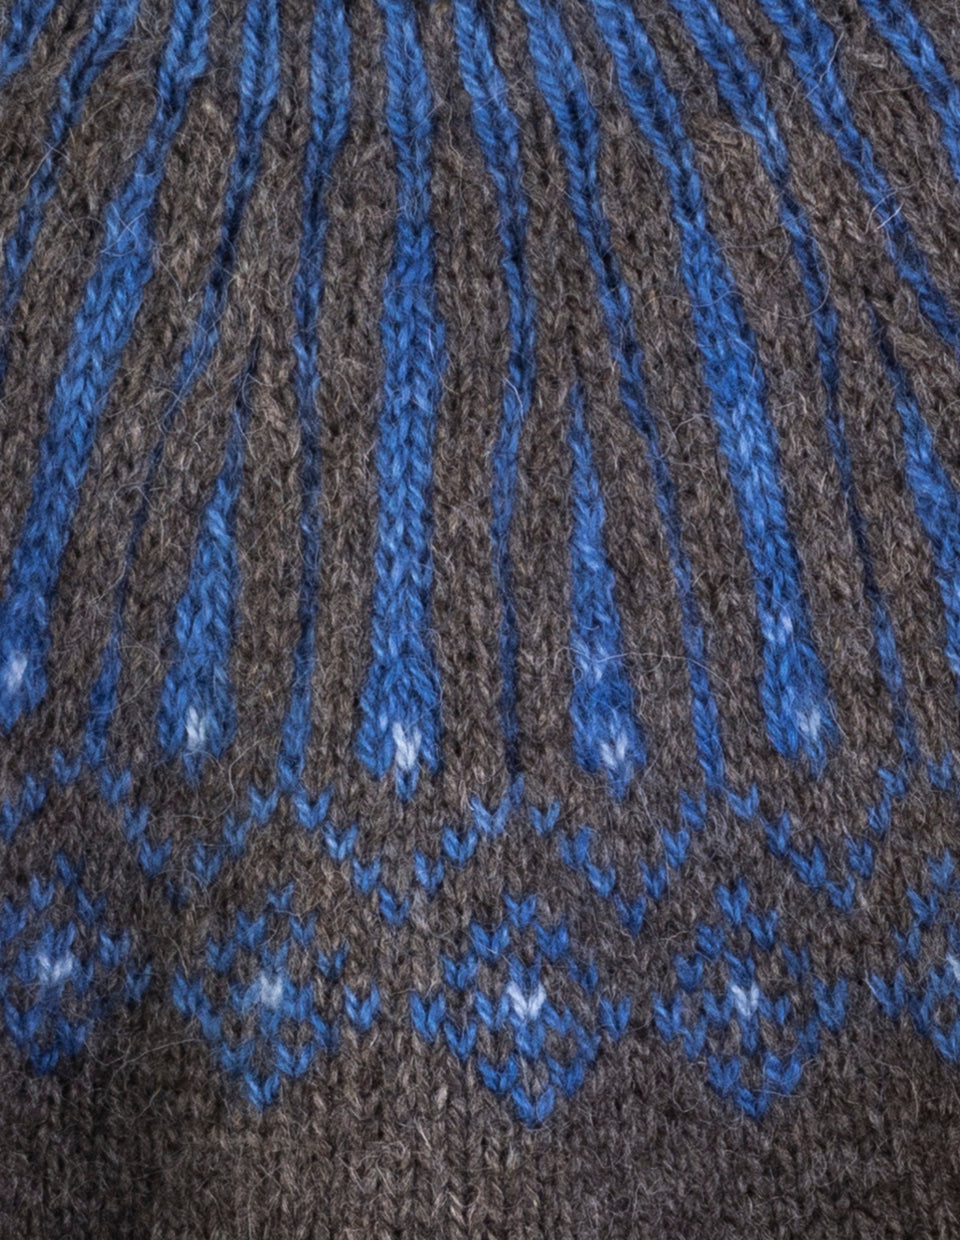 Markus in Full storm, hand knitted sweater